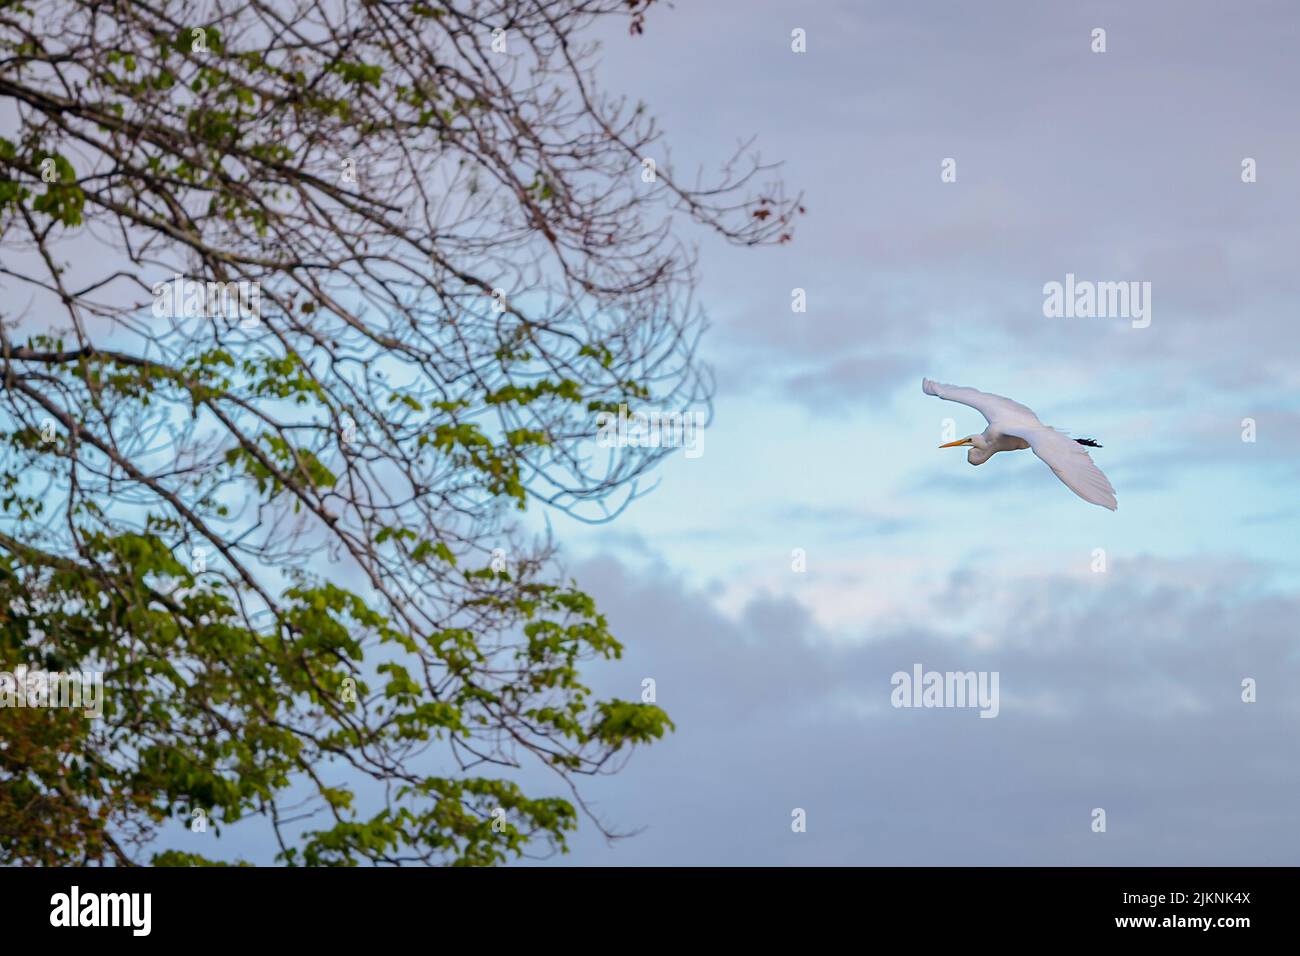 A panoramic view of flying bird with blue cloud and tree background Stock Photo